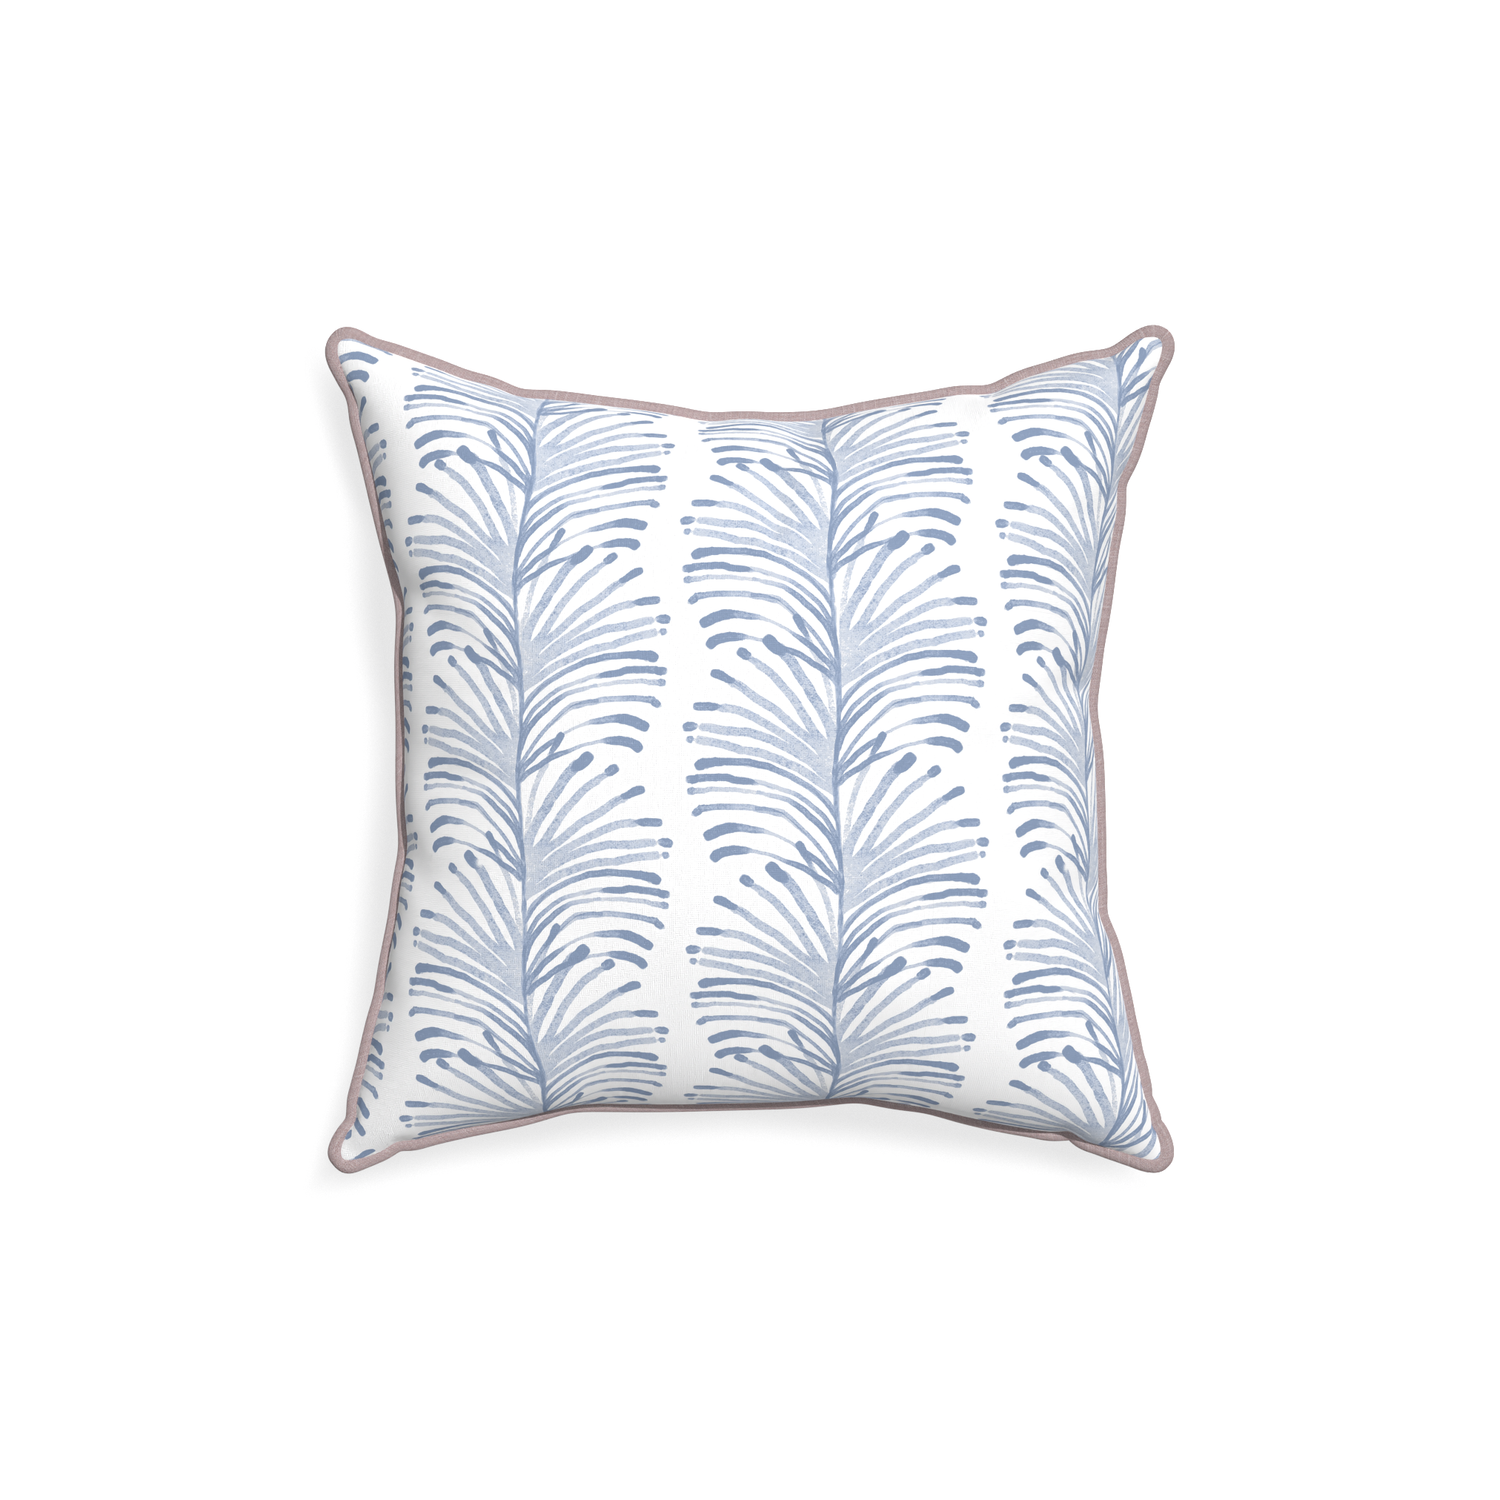 18-square emma sky custom sky blue botanical stripepillow with orchid piping on white background